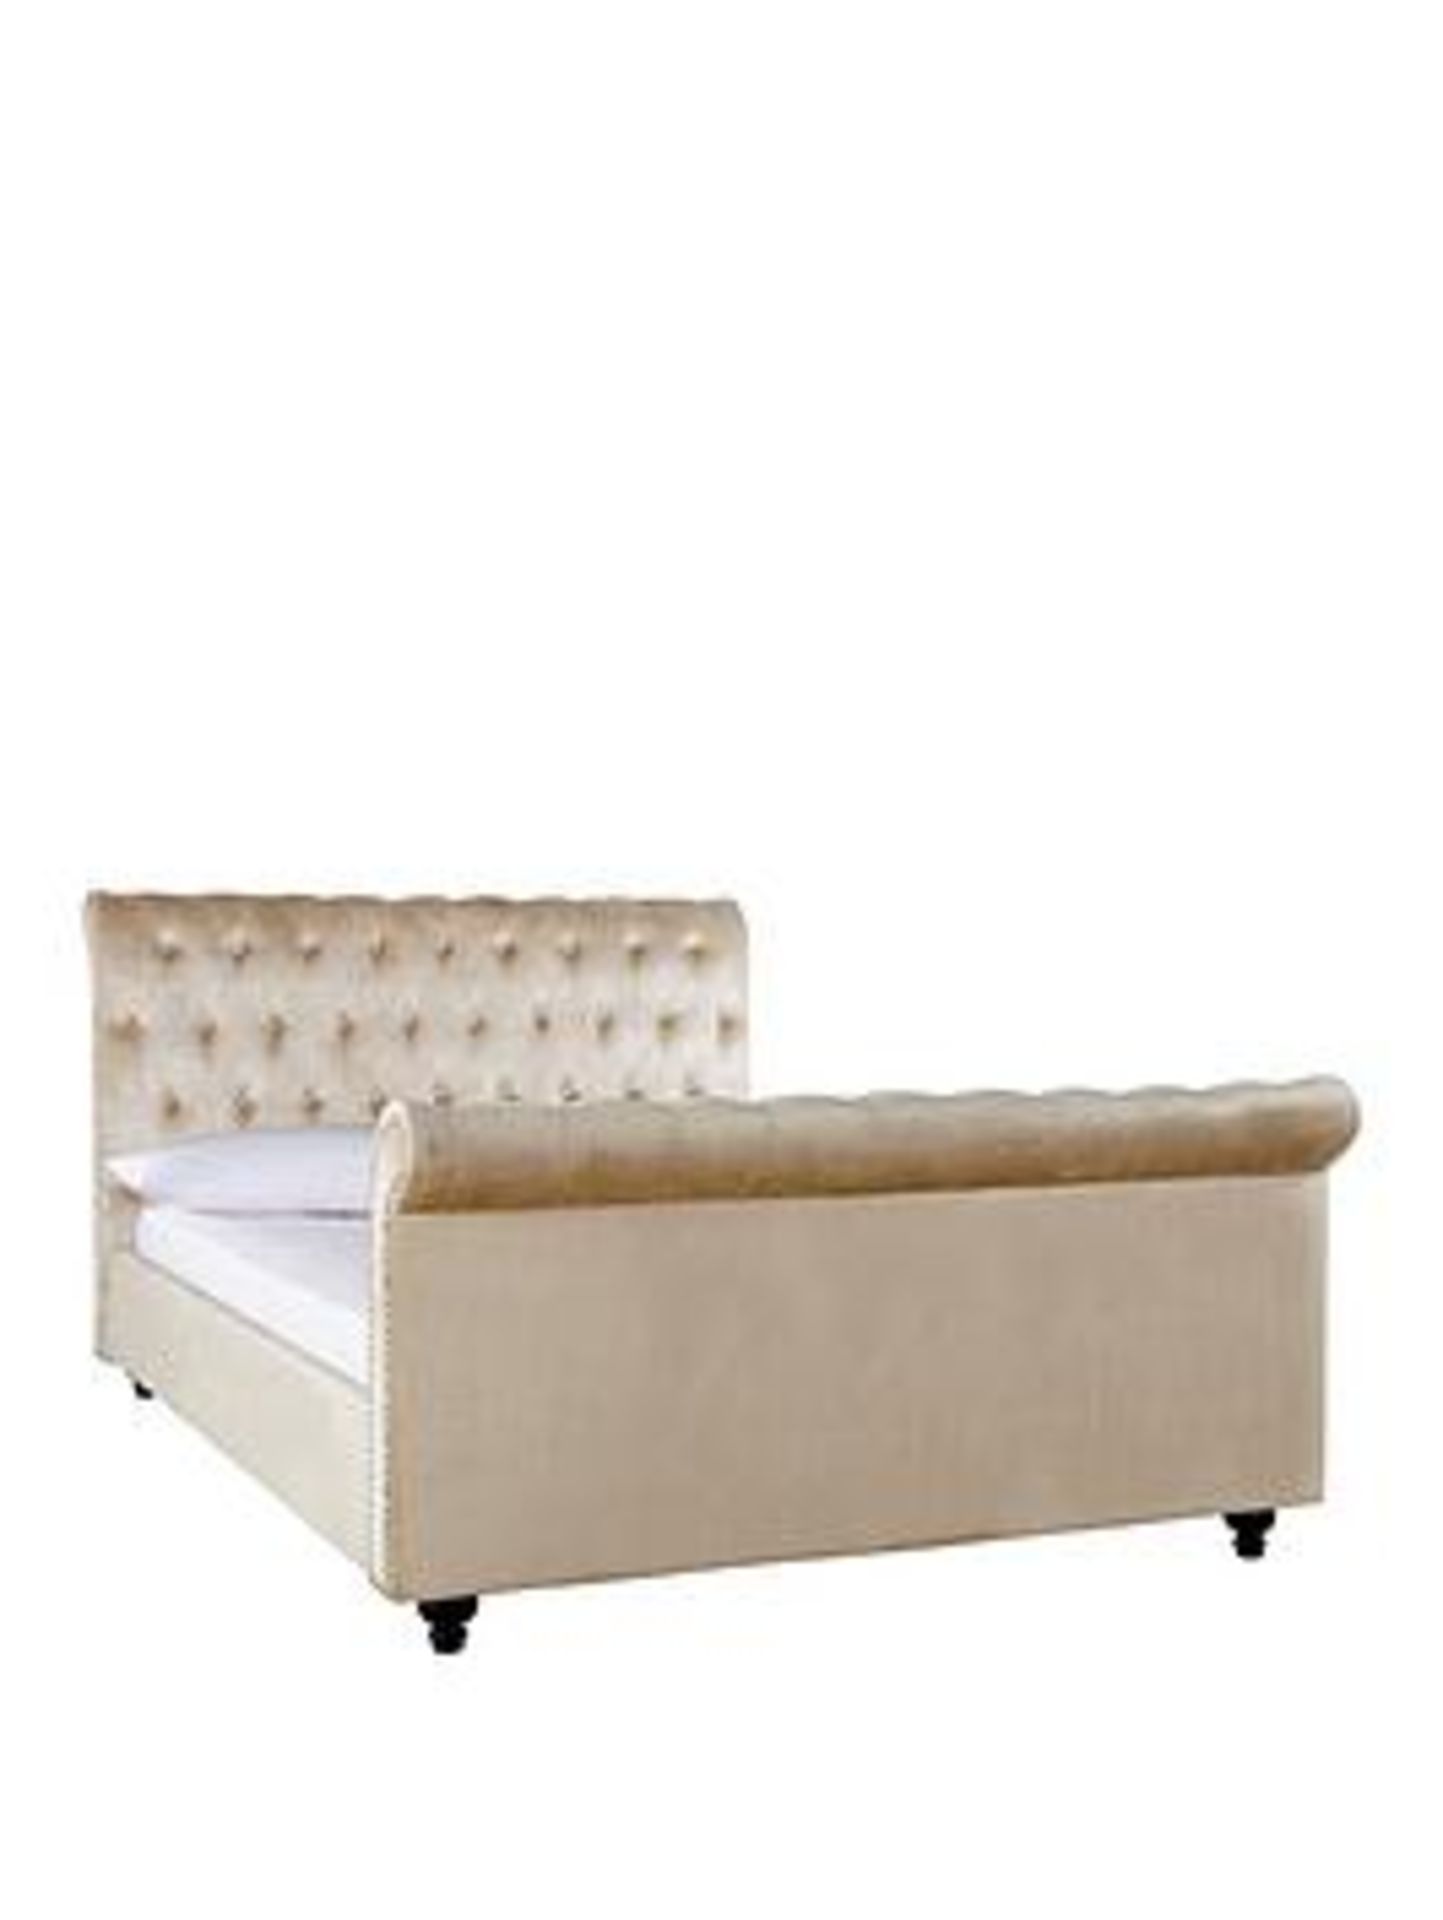 Boxed Item Woburn Super King Scroll Bed [Natural] And Mattress Set Rrp:¬£1258 - Image 2 of 3